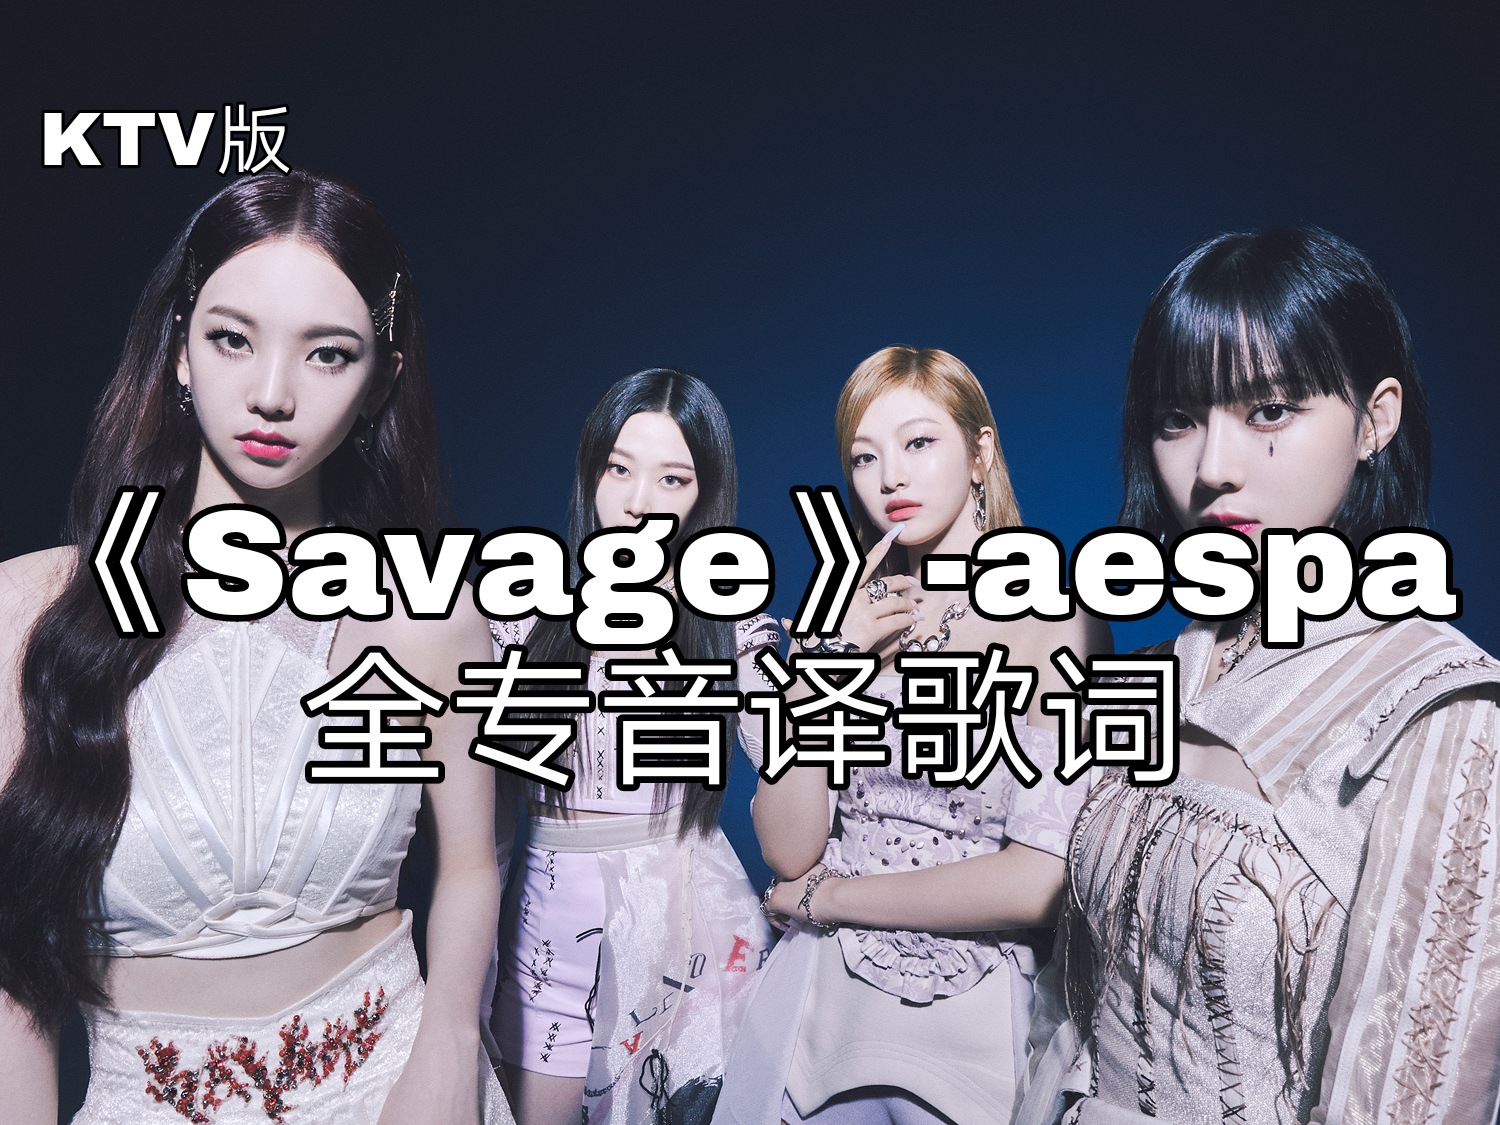 aespa Perfectly Encapsulate Y2K Energy with New MV "Spicy" | K-Pop Culture